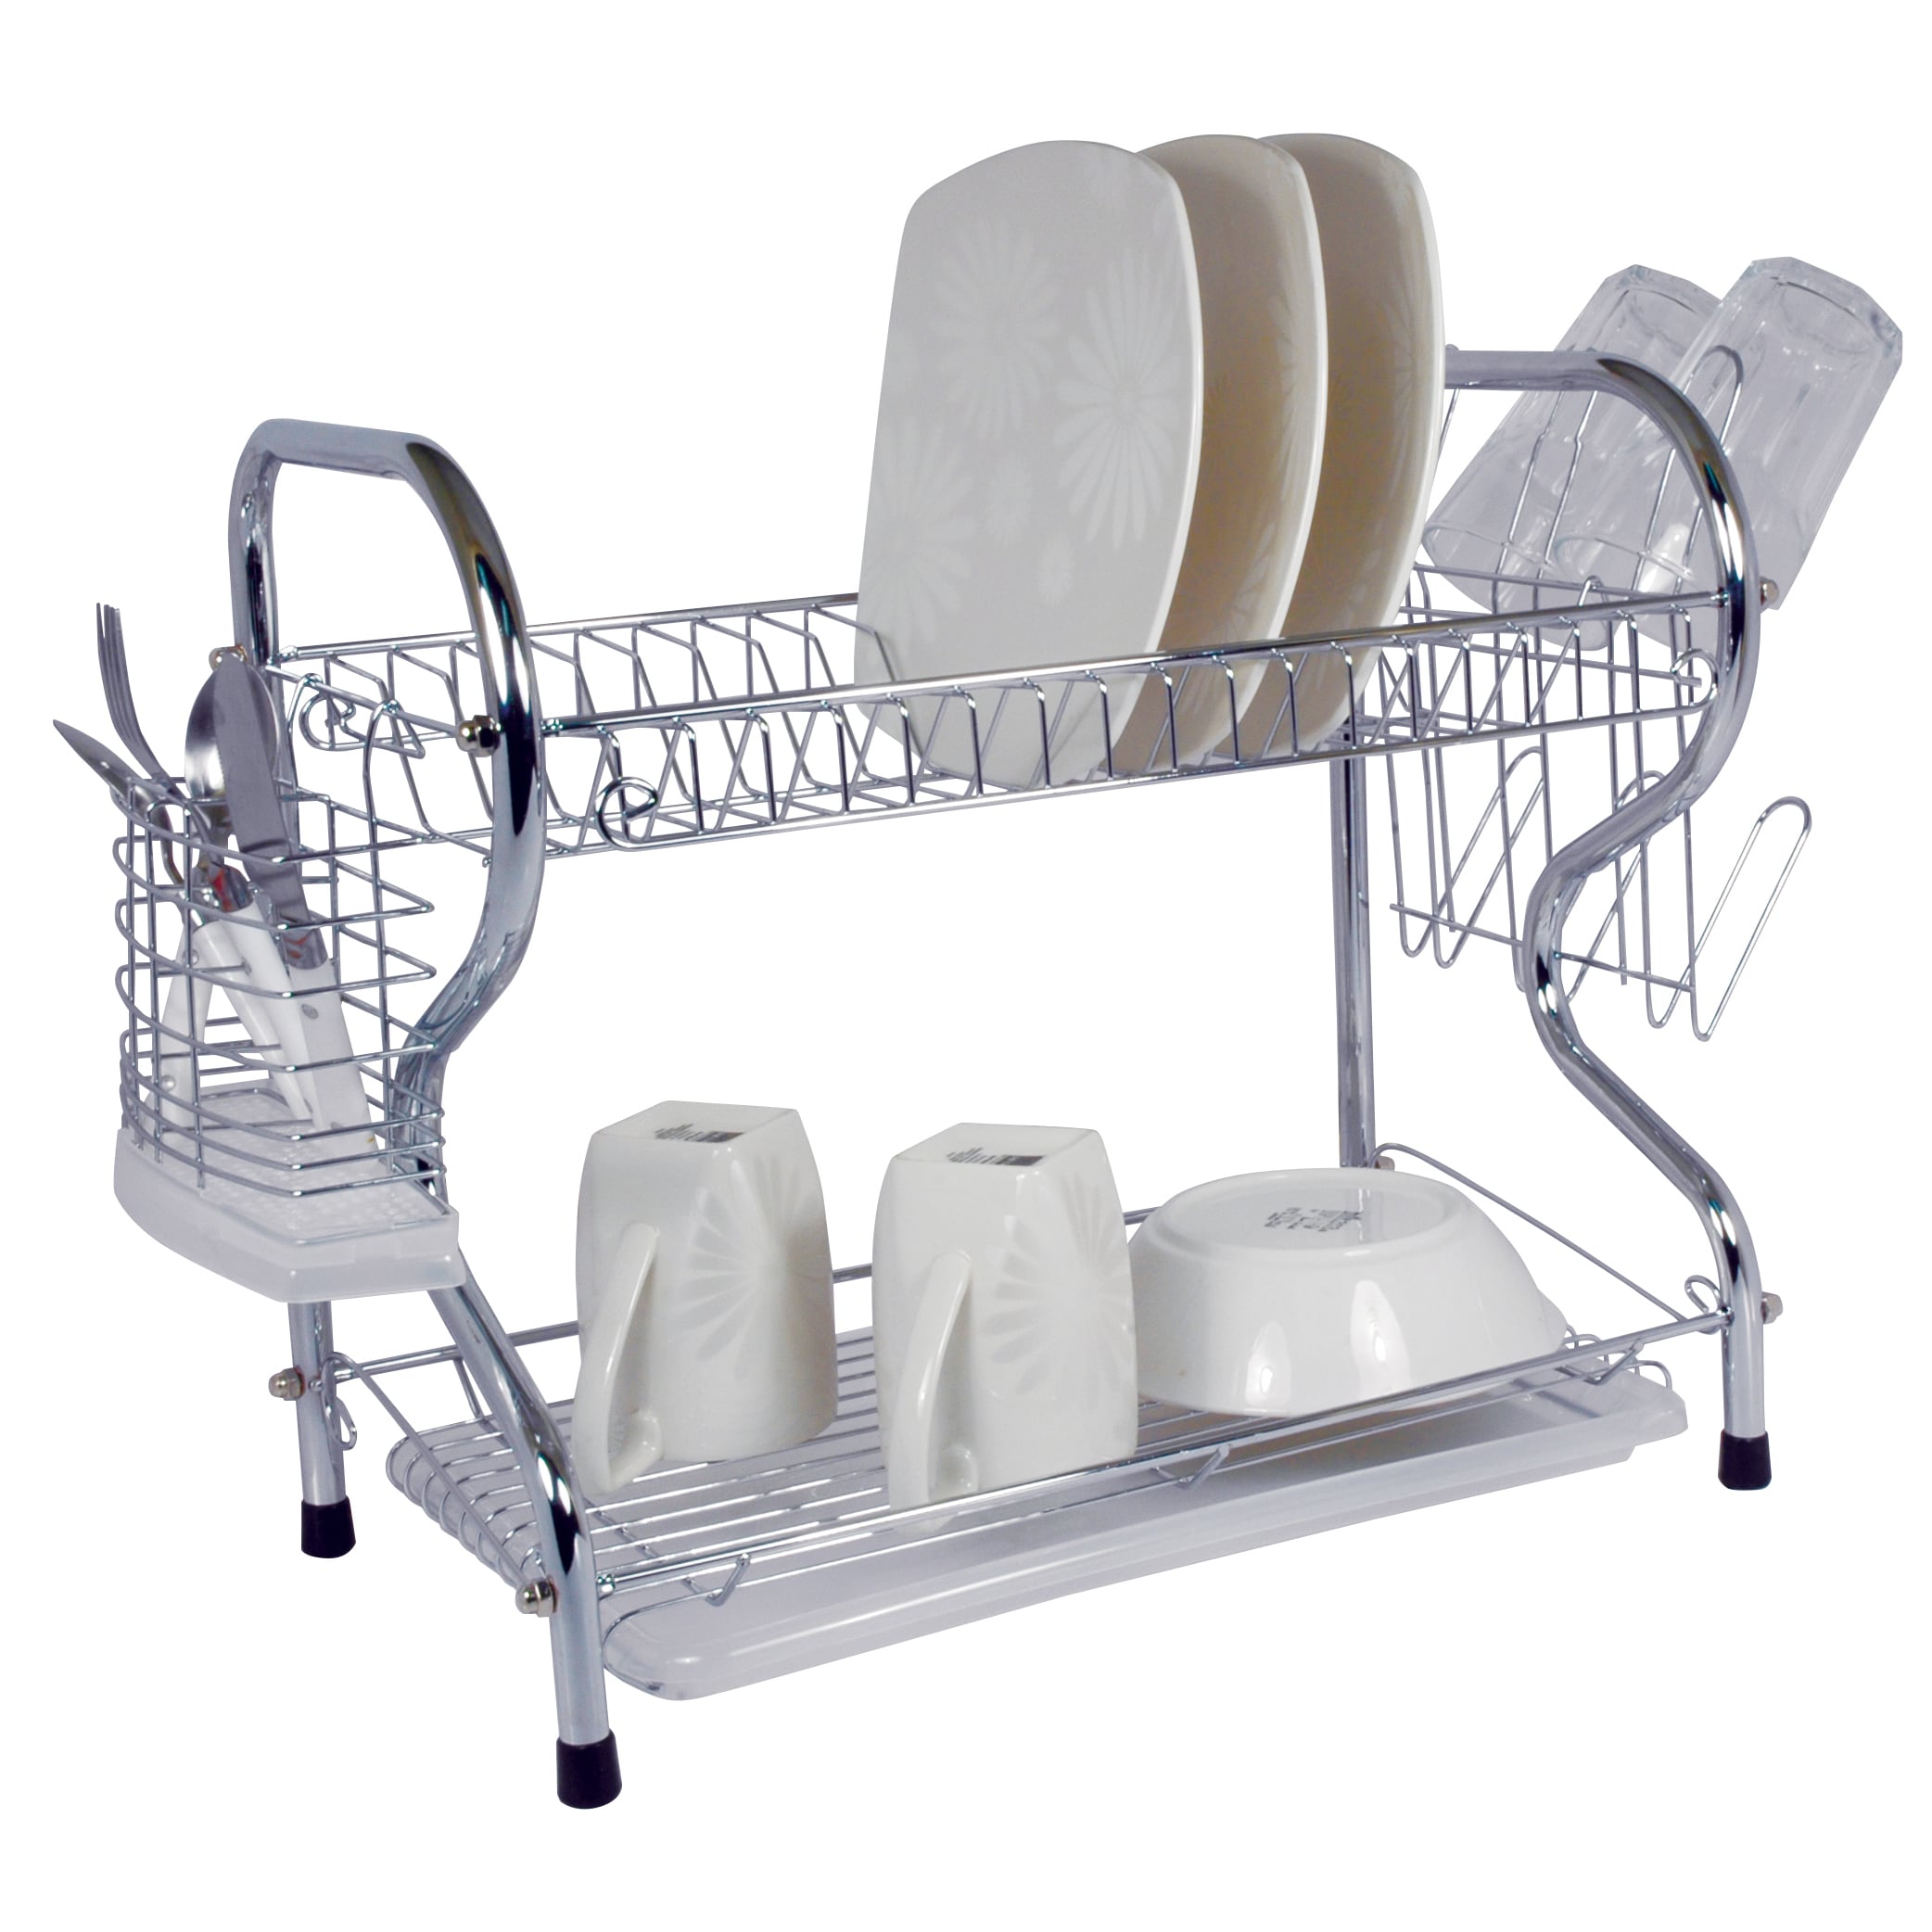 https://ak1.ostkcdn.com/images/products/11734460/22-Chrome-Dish-Rack-with-Utensil-Holder-Cup-Rack-and-Tray-4304c4bf-6550-4fda-ad53-d55f8f7fb720.jpg